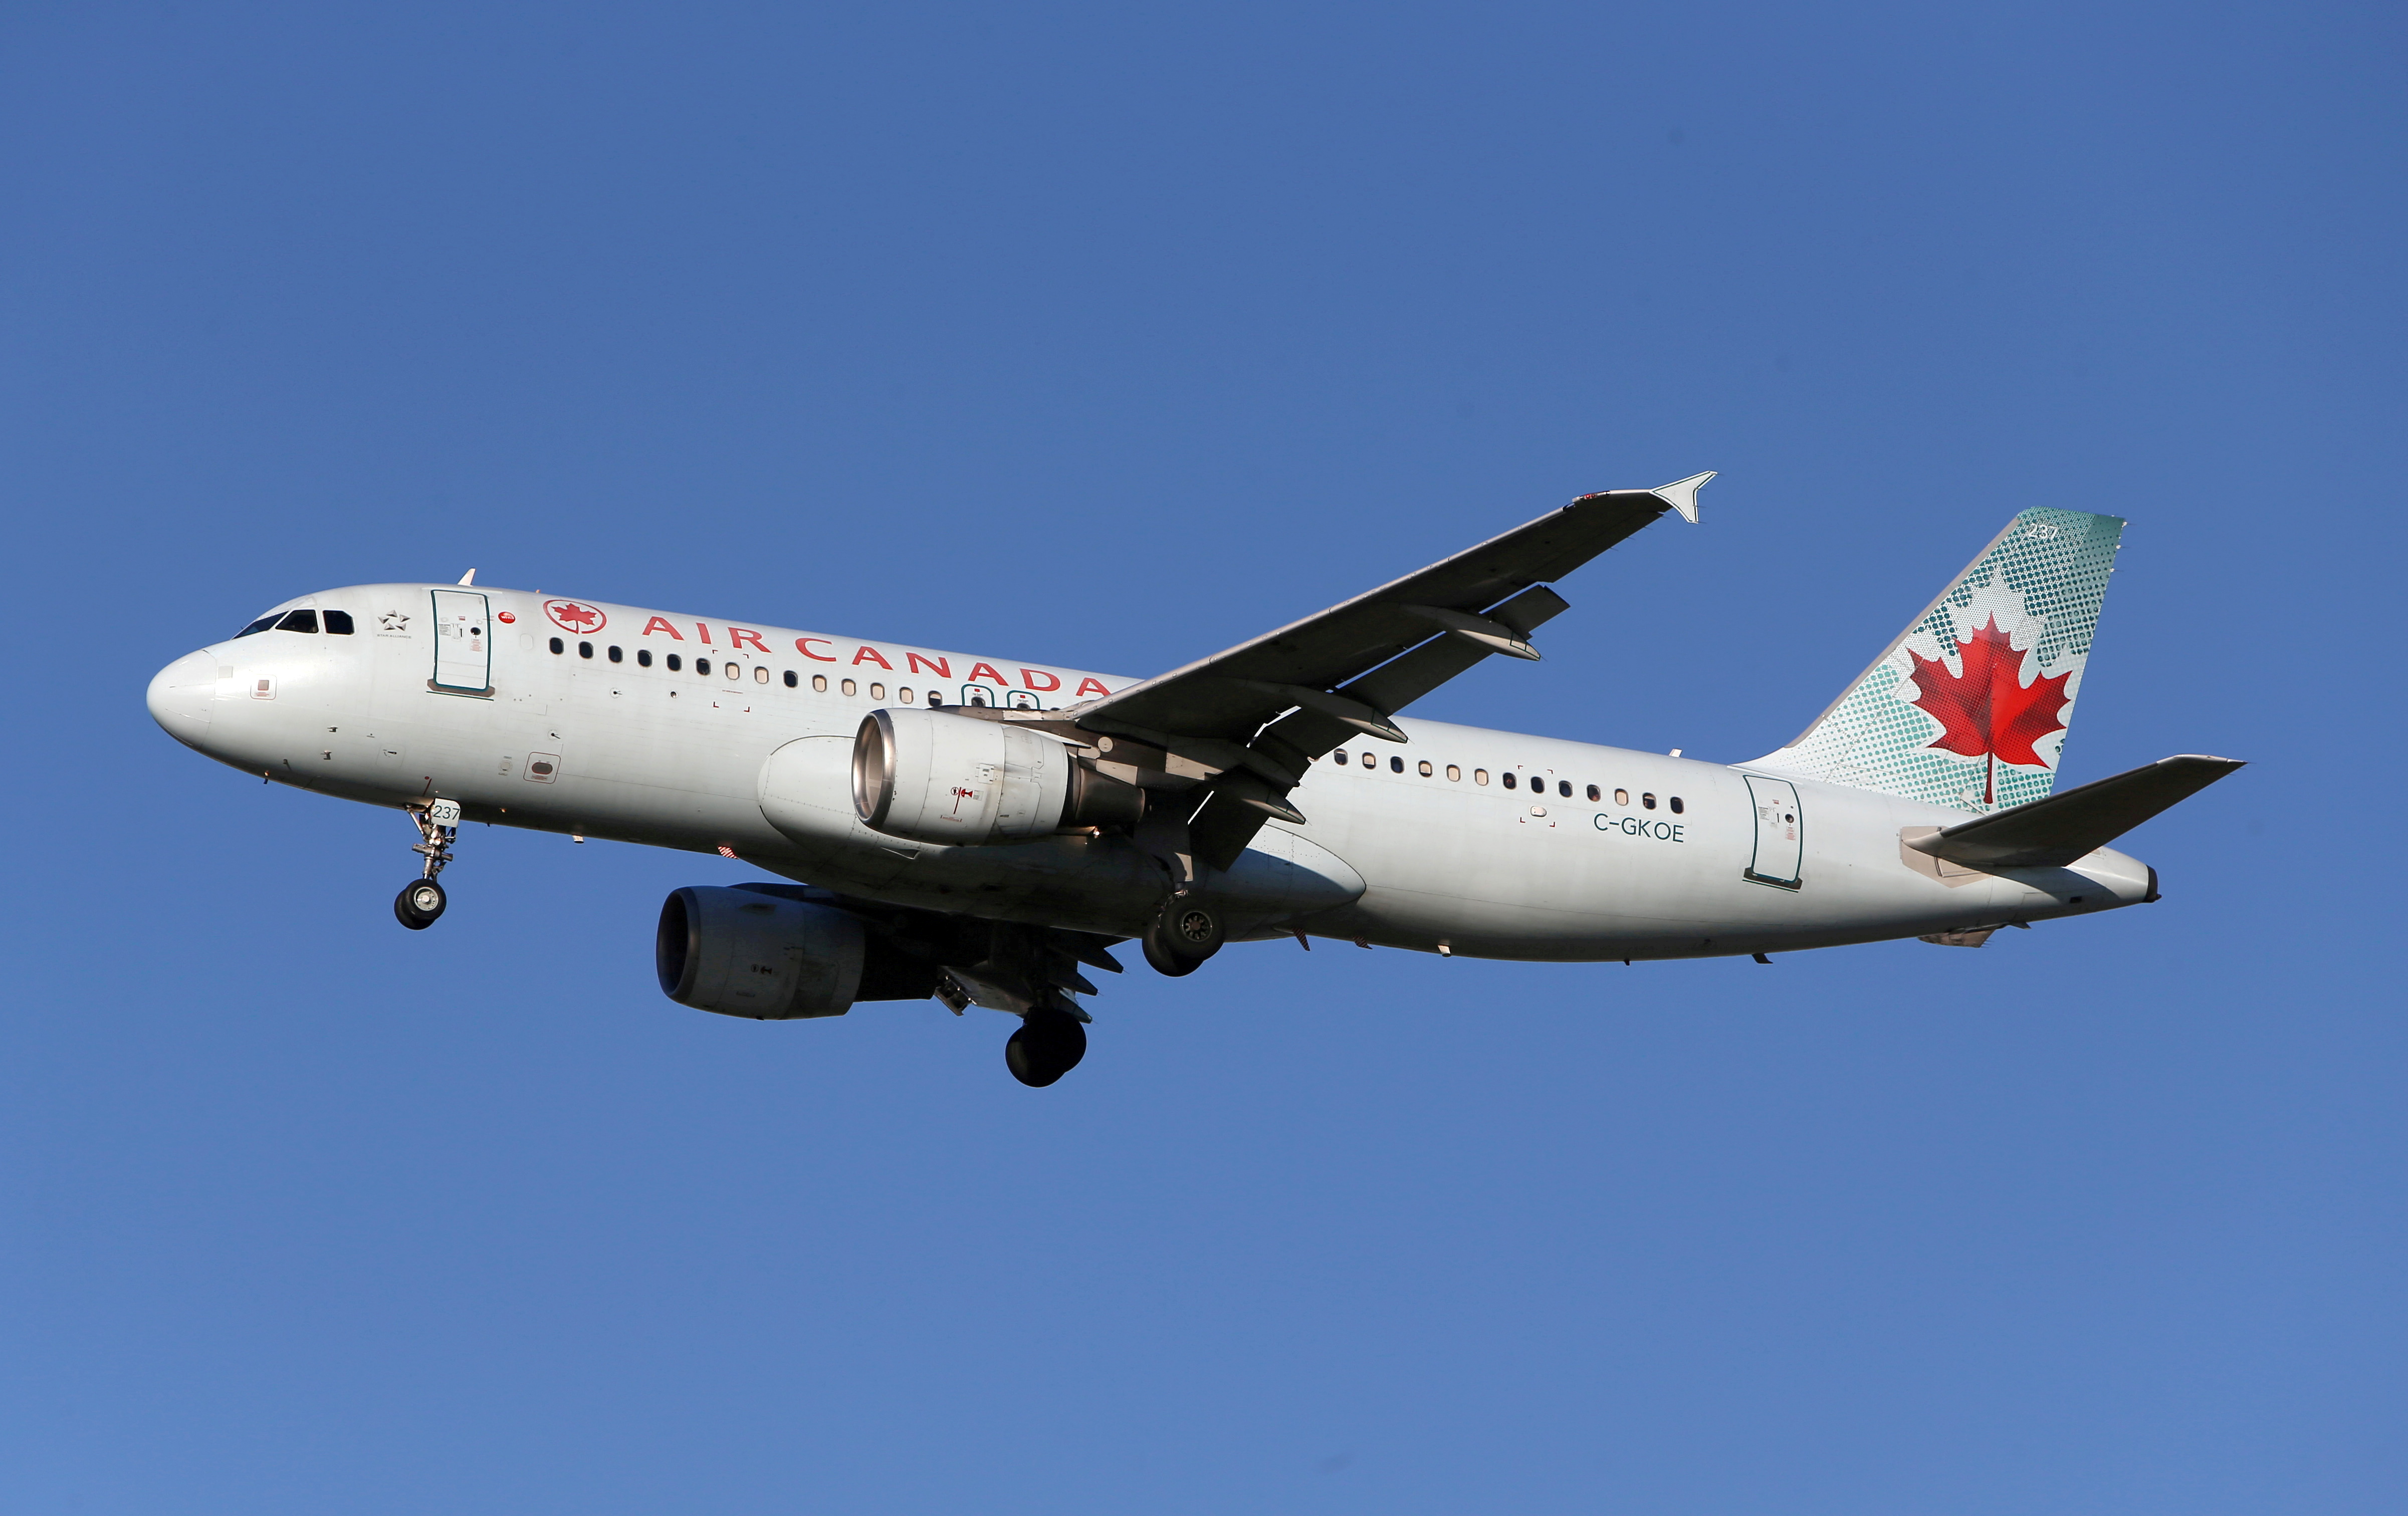 An Air Canada Airbus A320 airplane prepares to land at Vancouver's international airport in Richmond